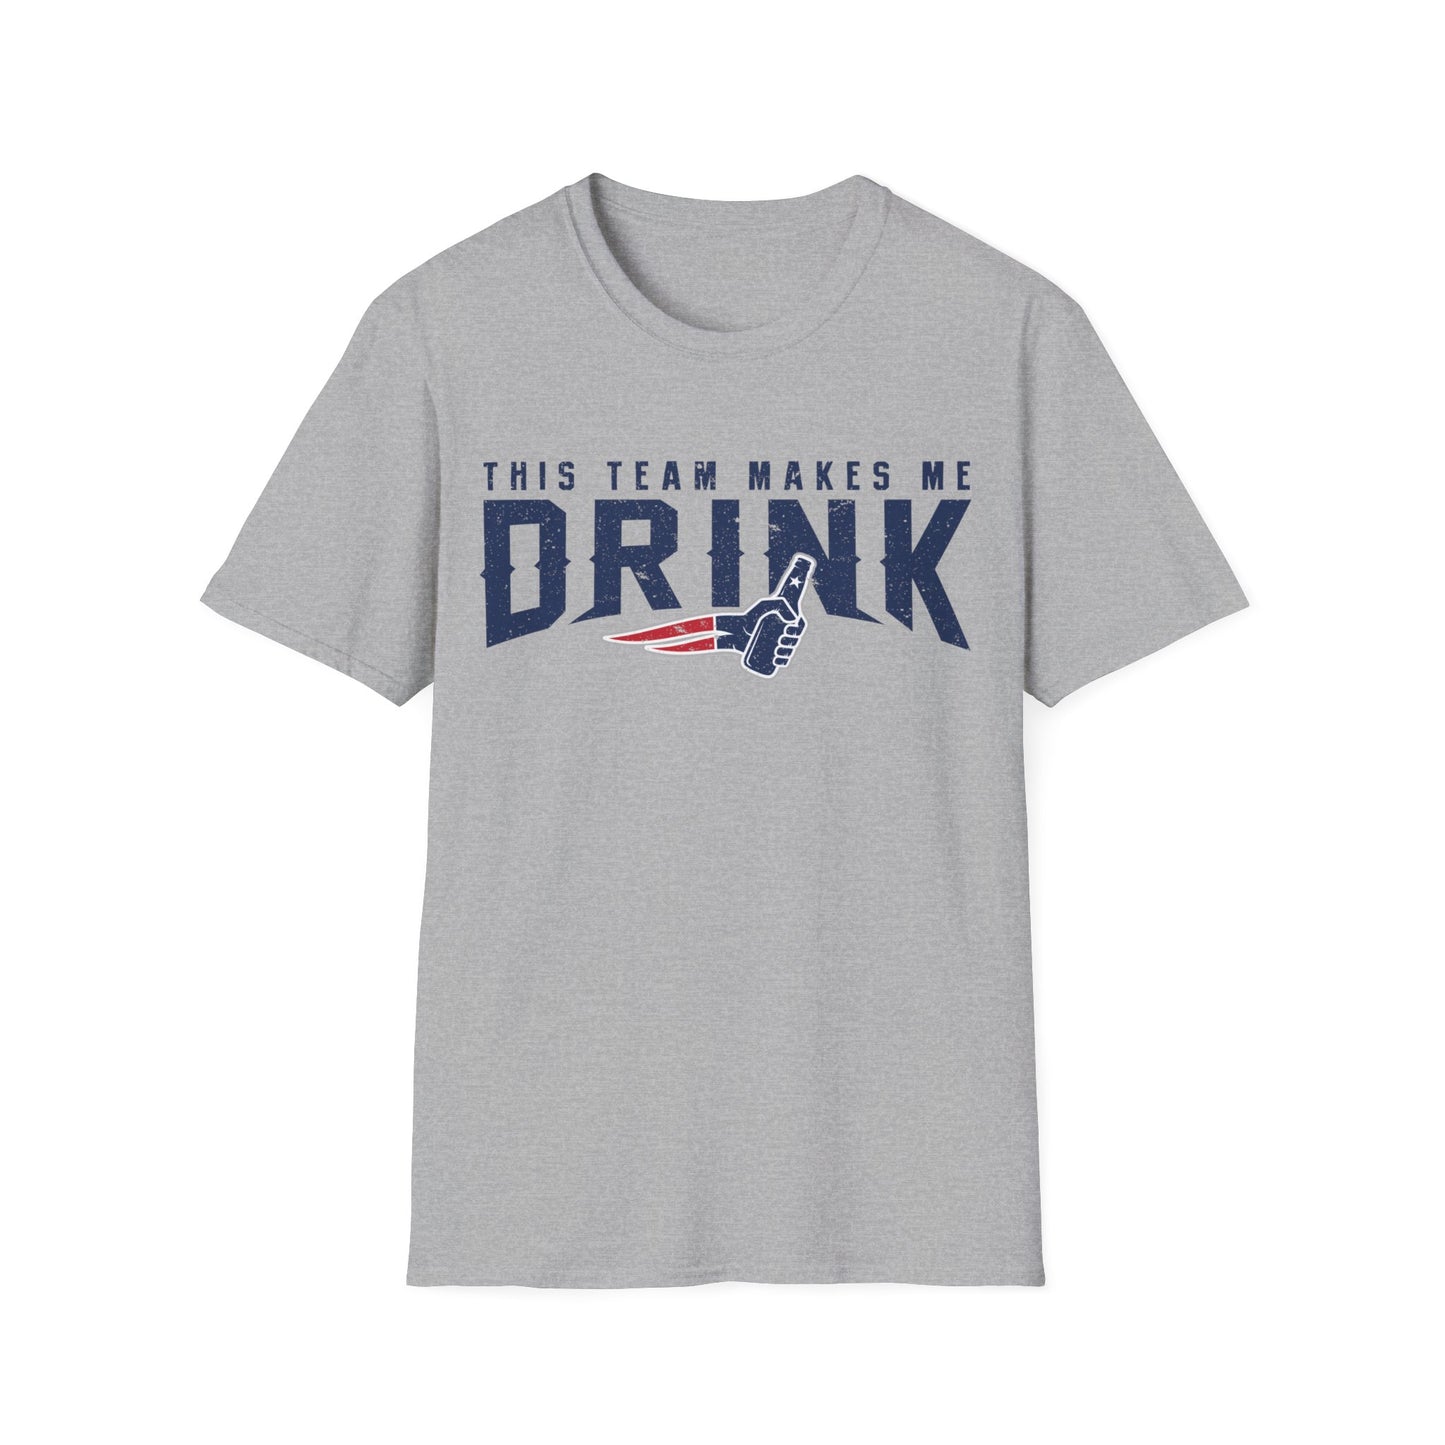 New England This Team Makes Me Drink T-shirt